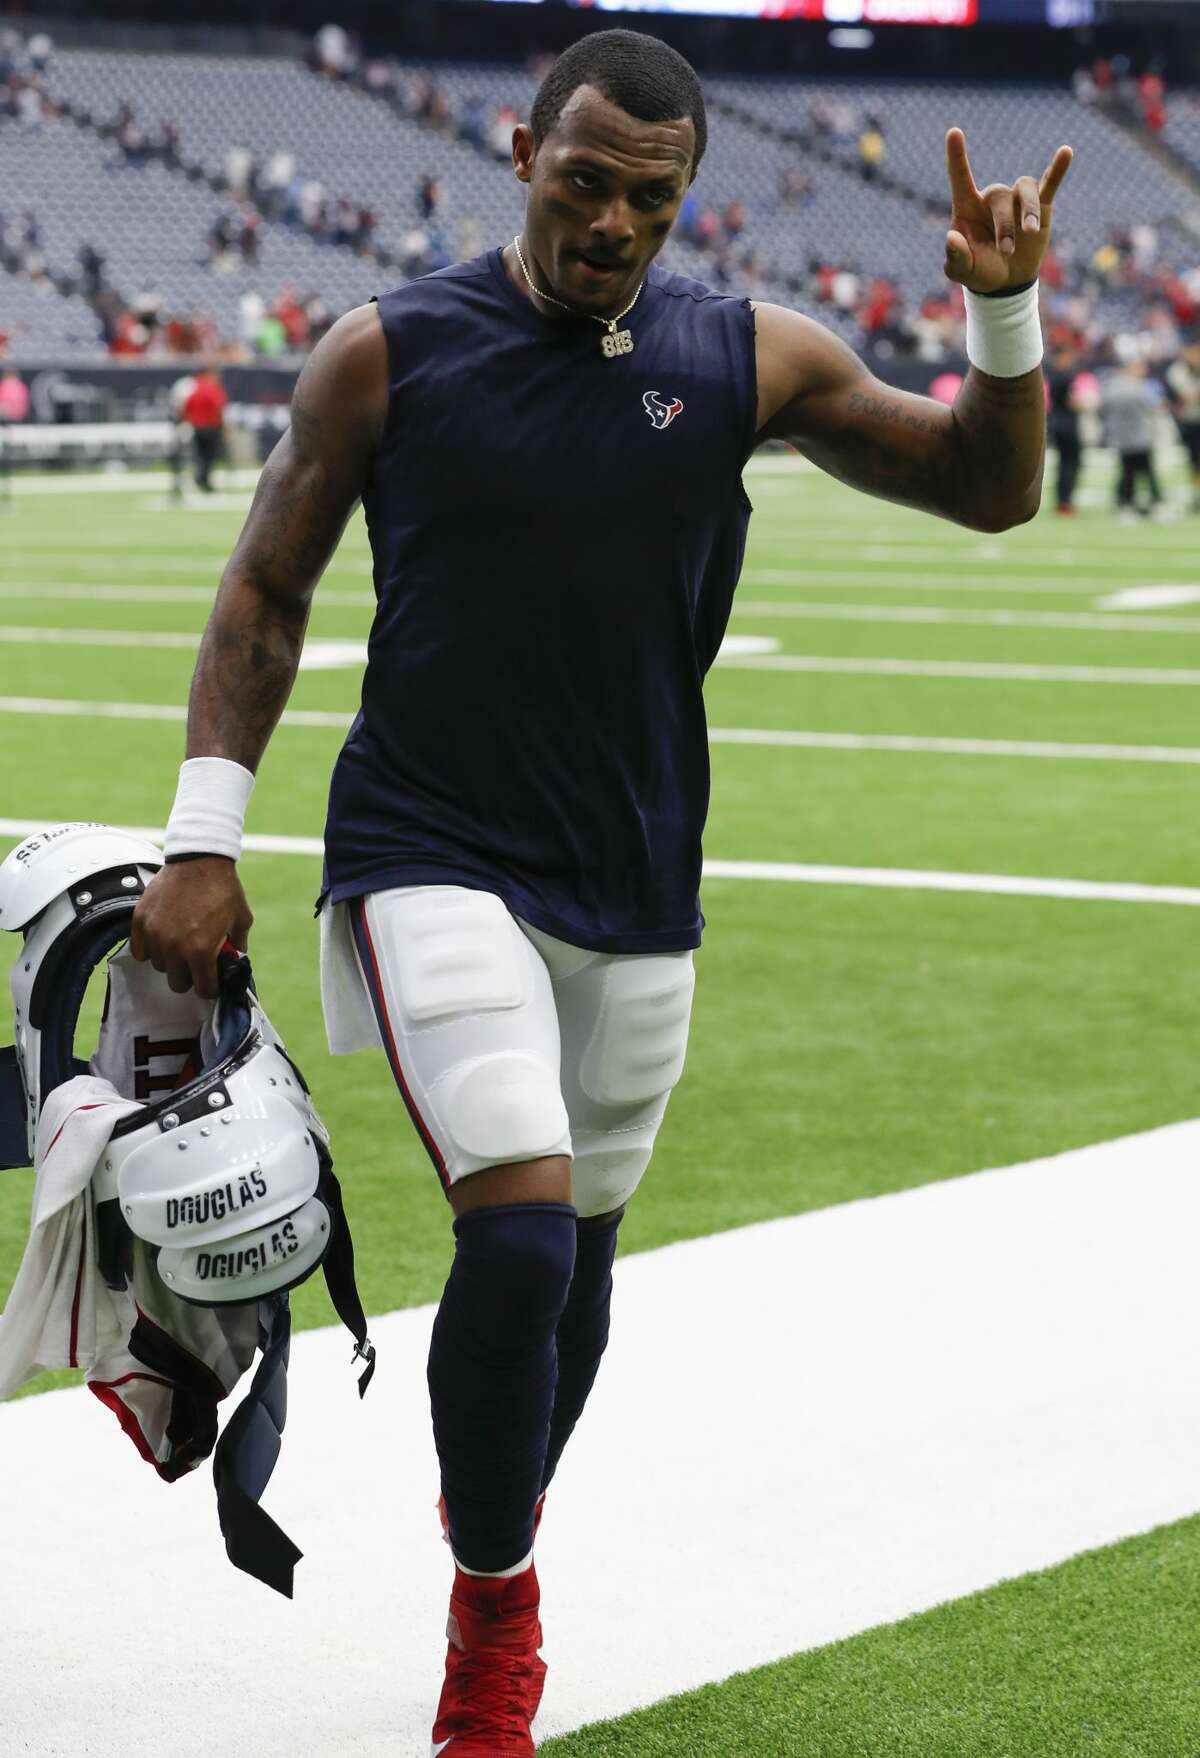 Houston Texans quarterback Deshaun Watson waves to the fans as he leaves the field following the Texans' 53-32 win over the Atlanta Falcons in NFL football game at NRG Stadium on Sunday, monthnameap} 6, 2019, in Houston.